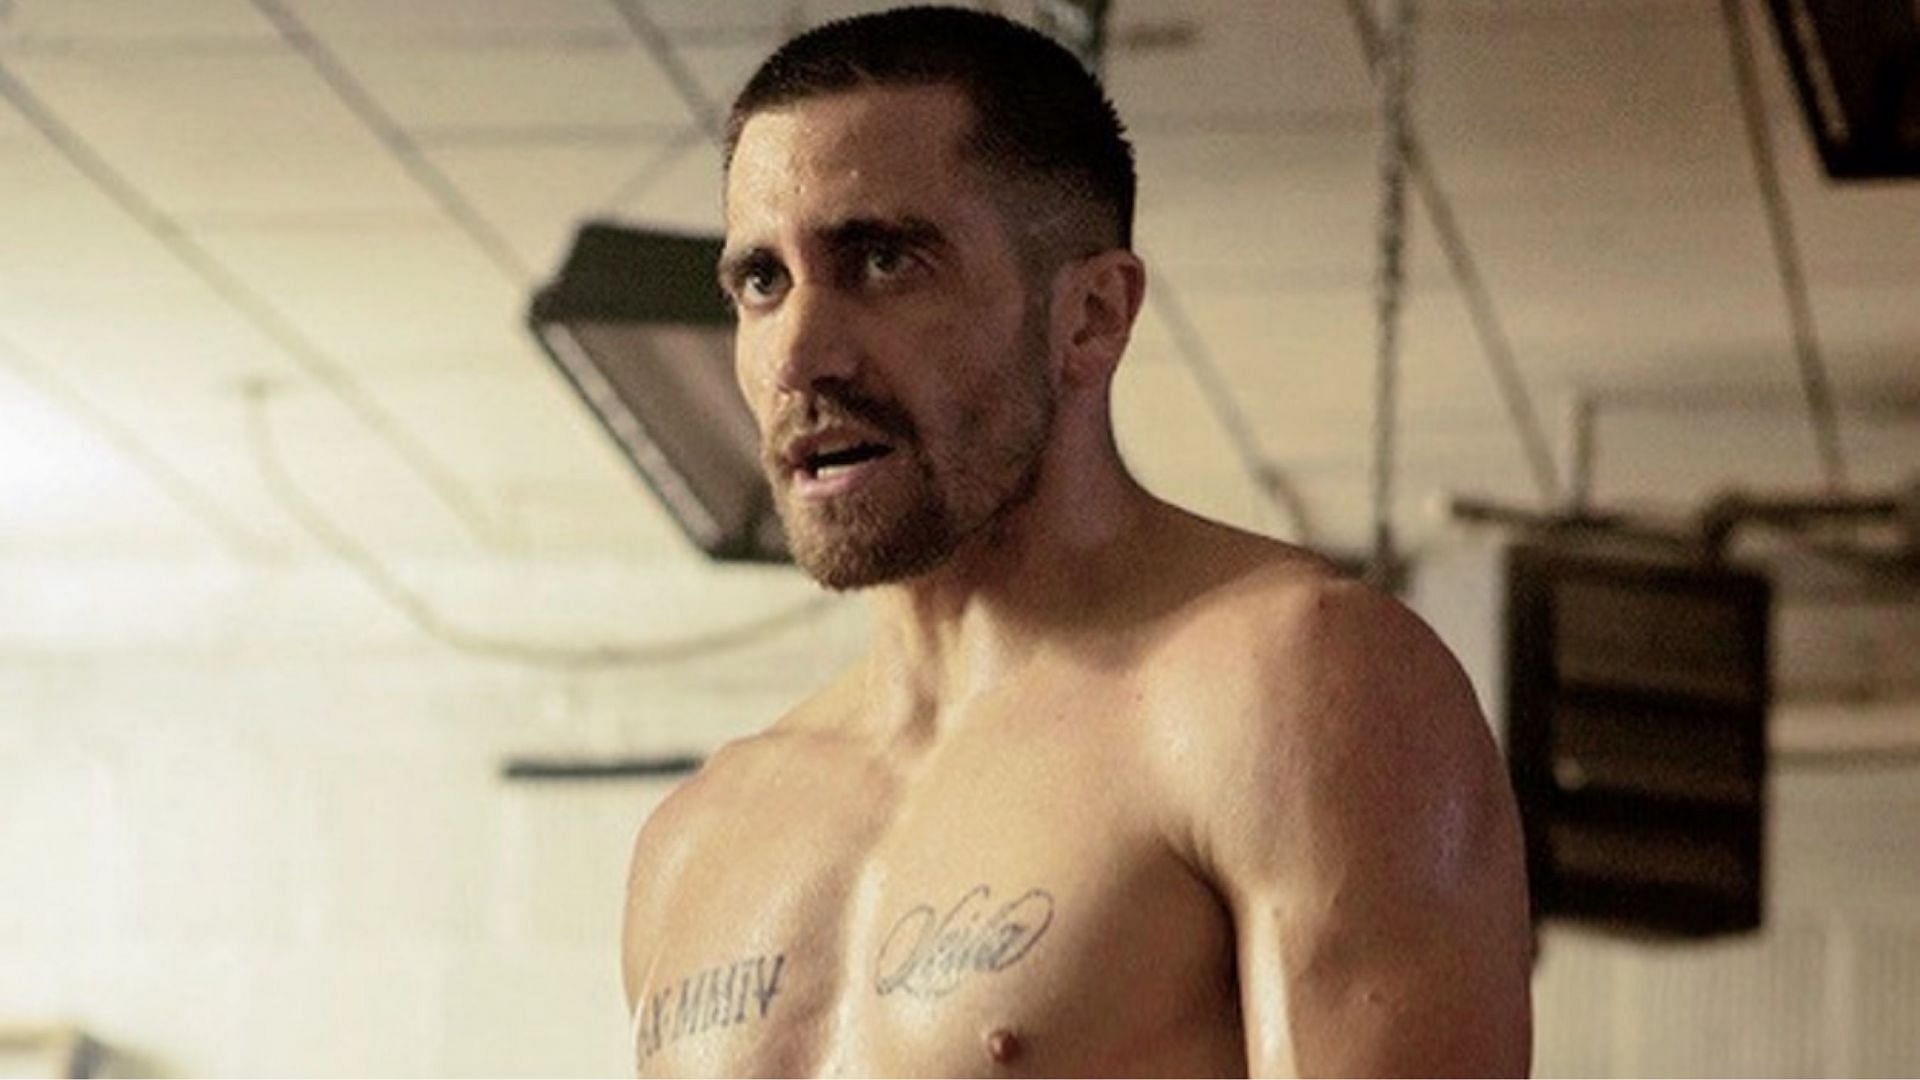 Was Jake Gyllenhaal's movie Southpaw based on a true story?